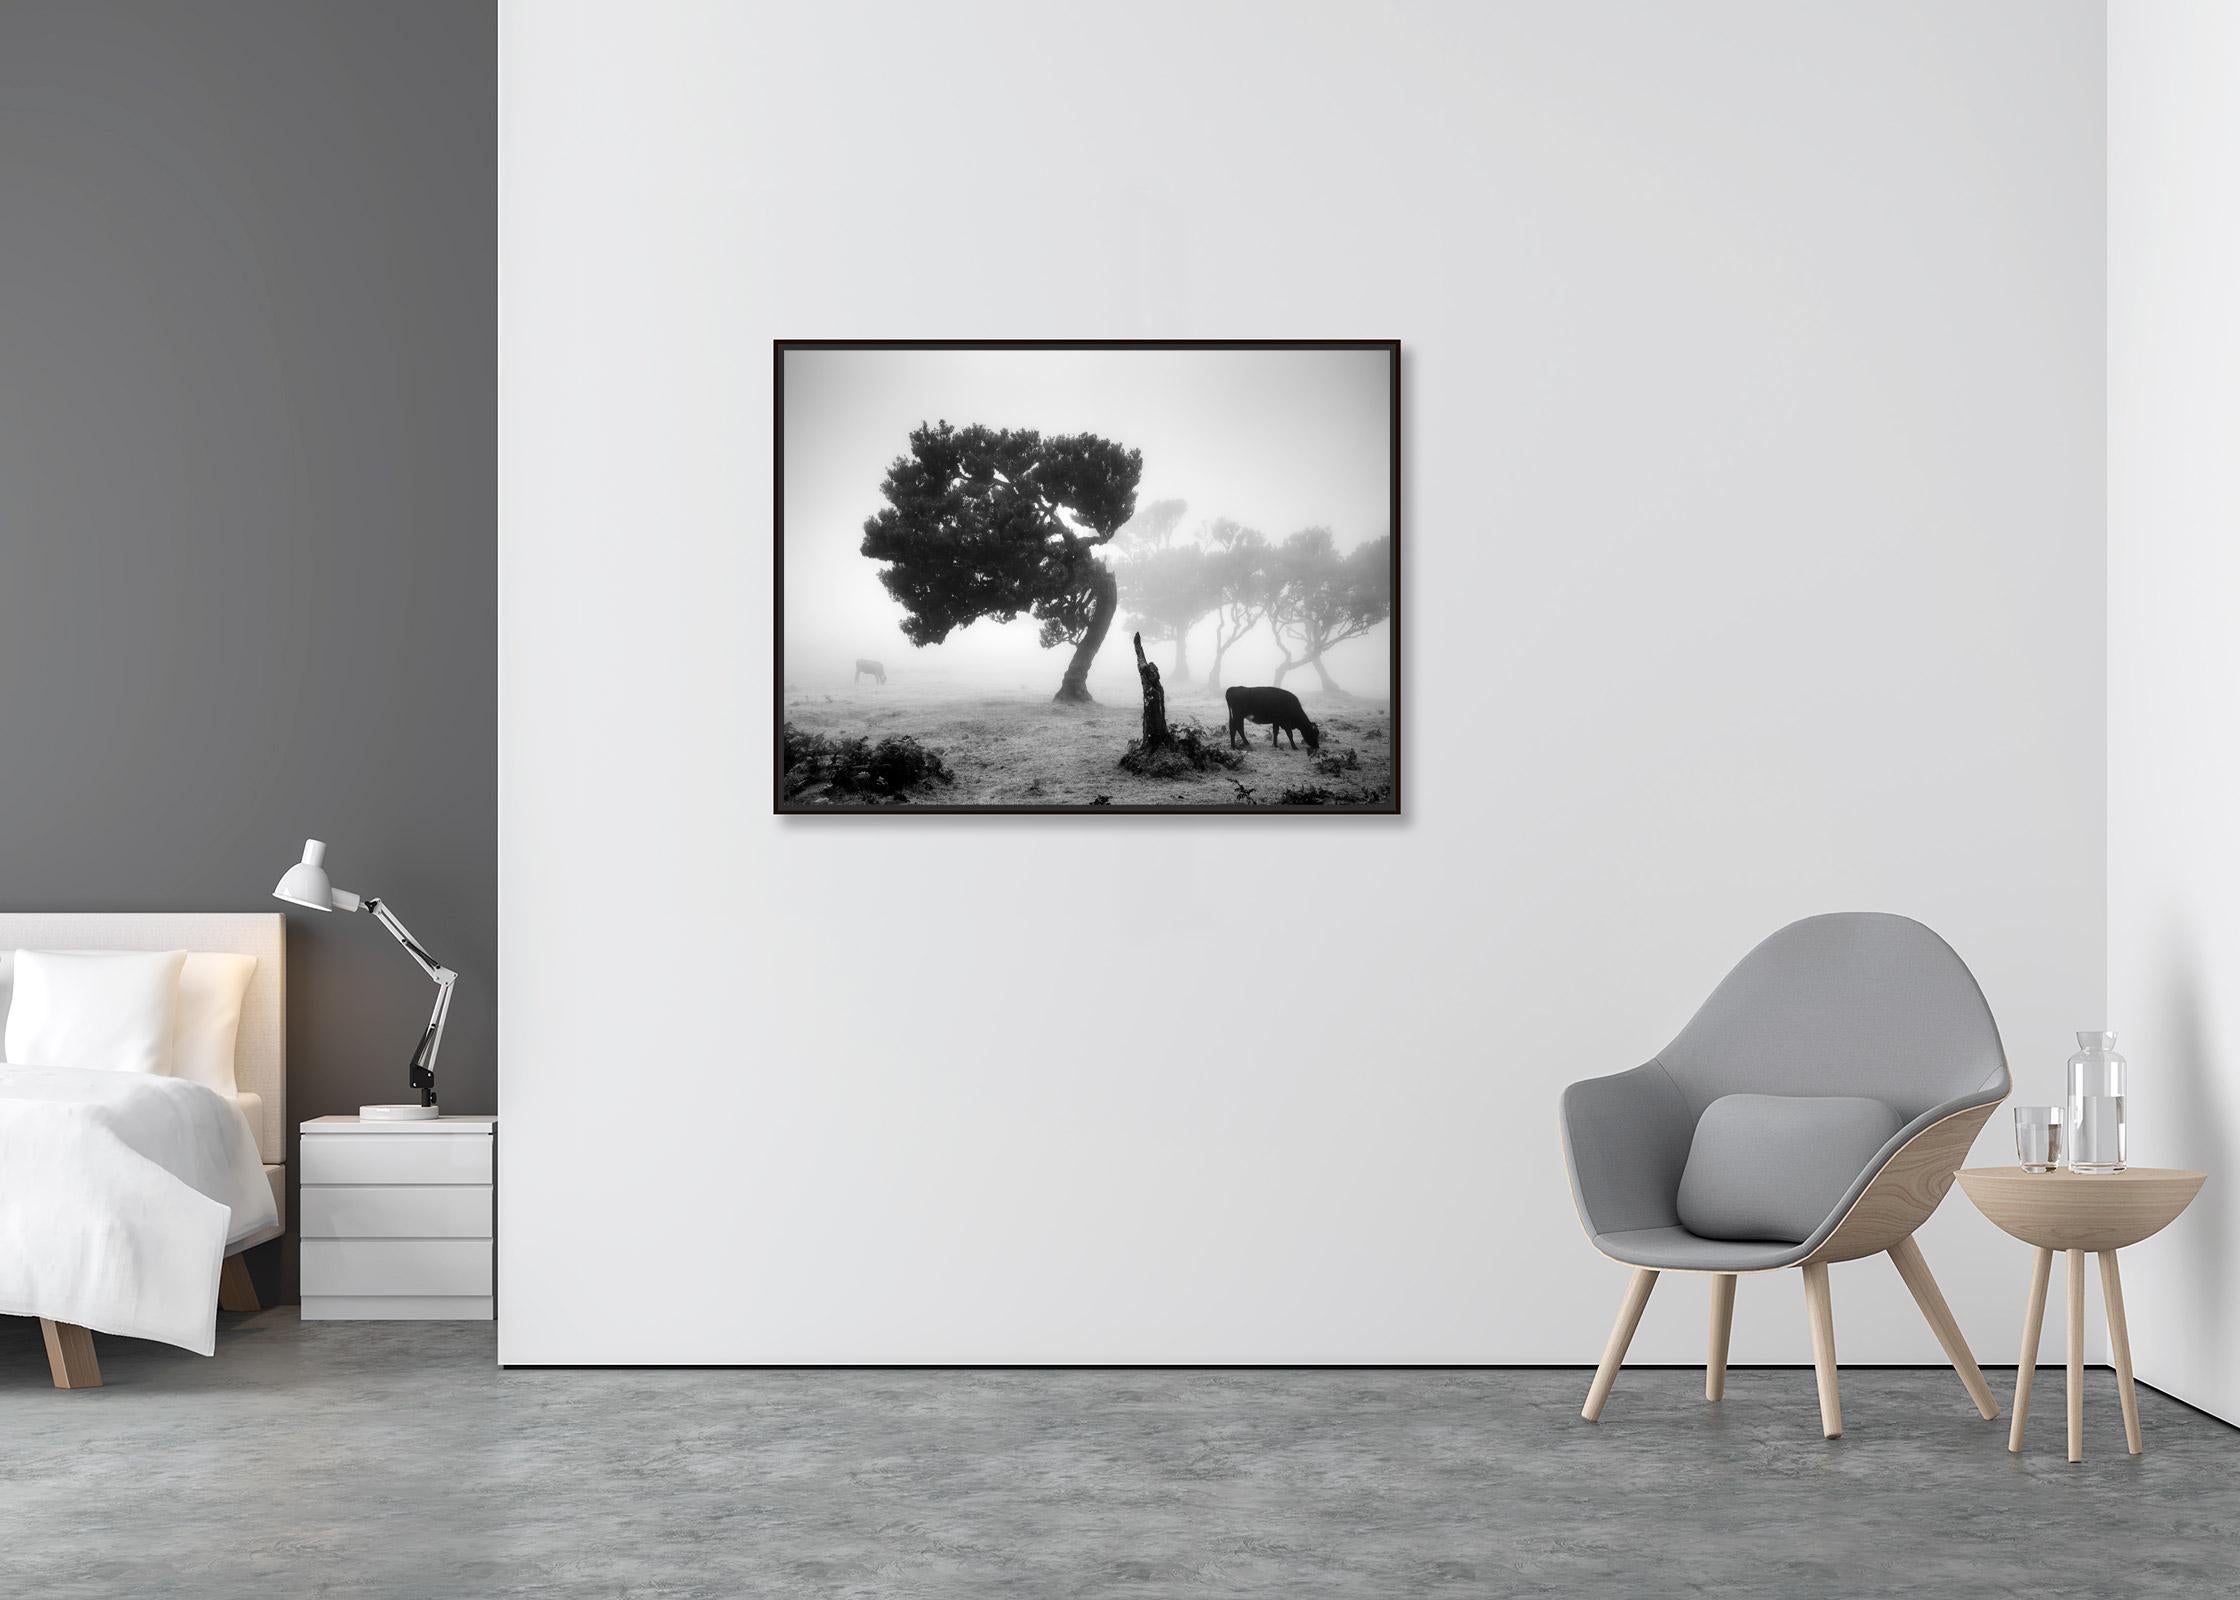 Cows on the foggy Pasture, misty forest, black and white photography, landscape - Contemporary Photograph by Gerald Berghammer